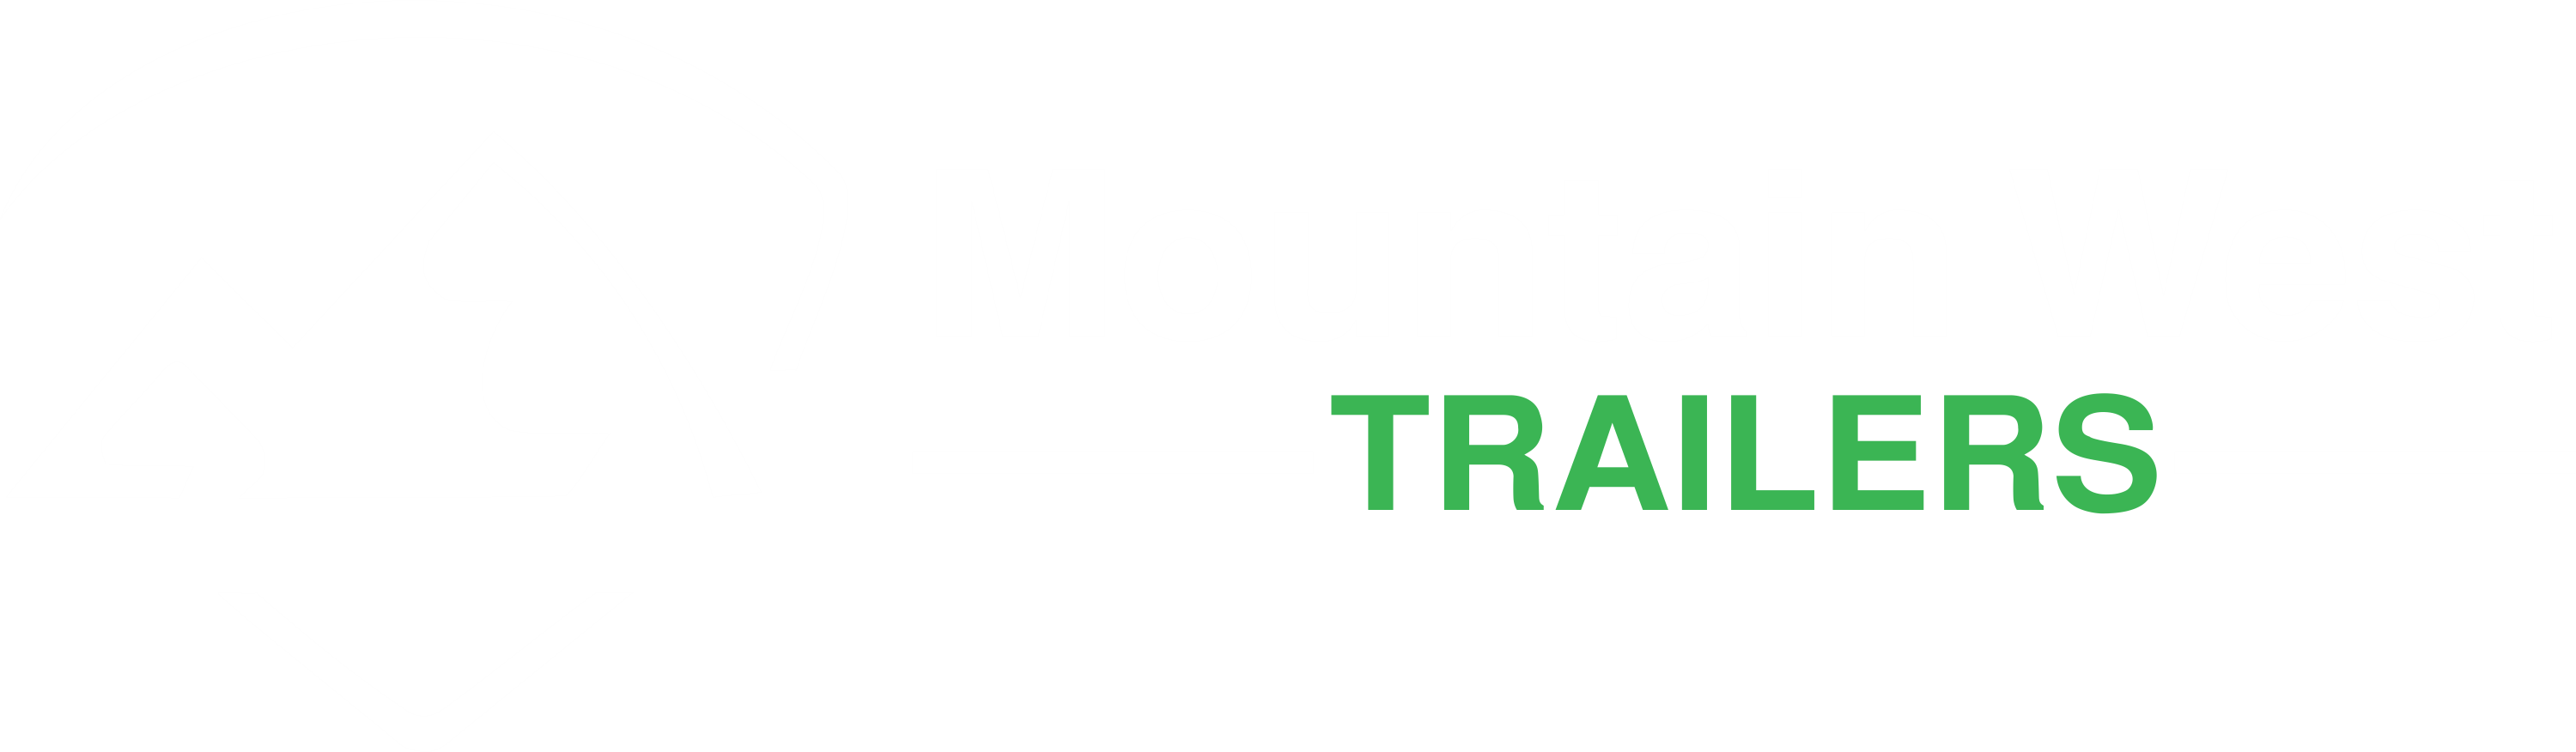 Mountain West Trailers serves Heber City, Provo, Salt Lake City, and Ogden.